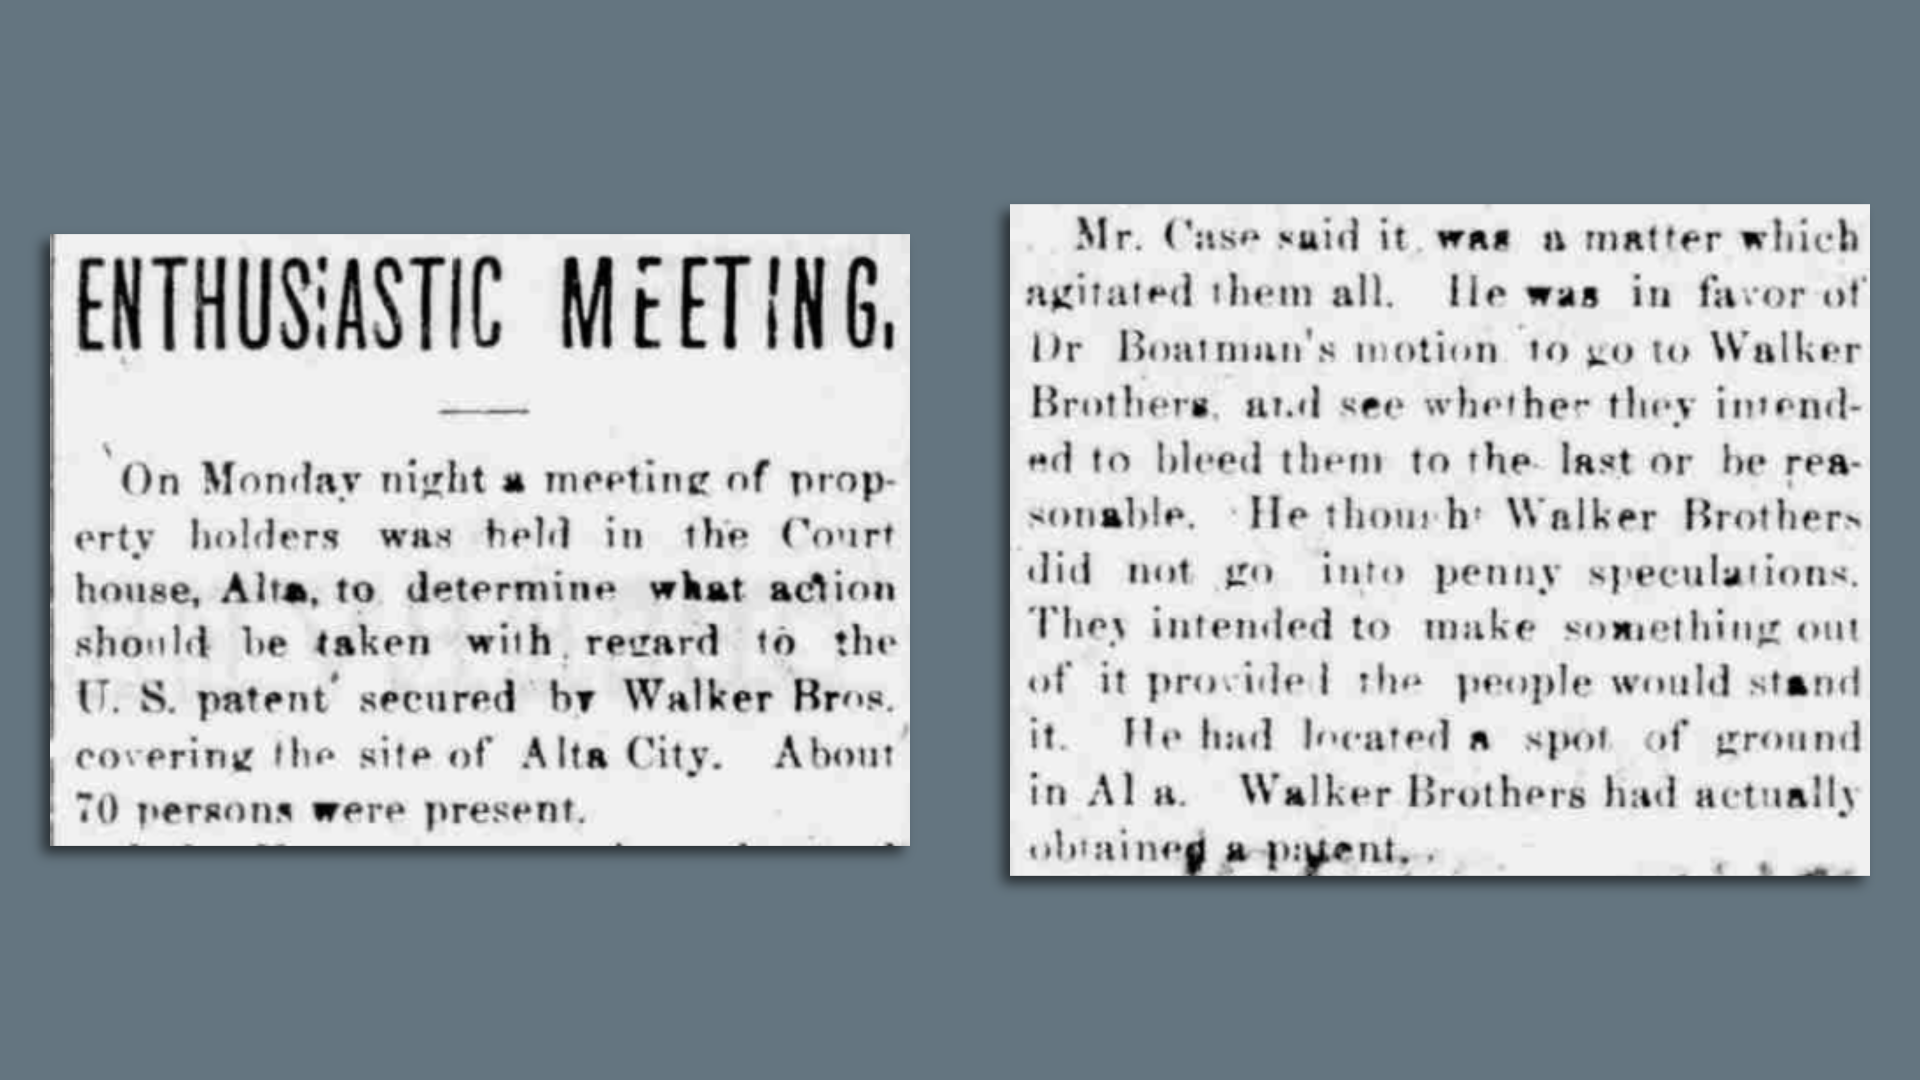 An old newspaper article is titled "Enthusiastic Meeting" and describes anxiety in the town of Alta, Utah, in 1873 after learning wealthy businessmen owned all the land in the town.